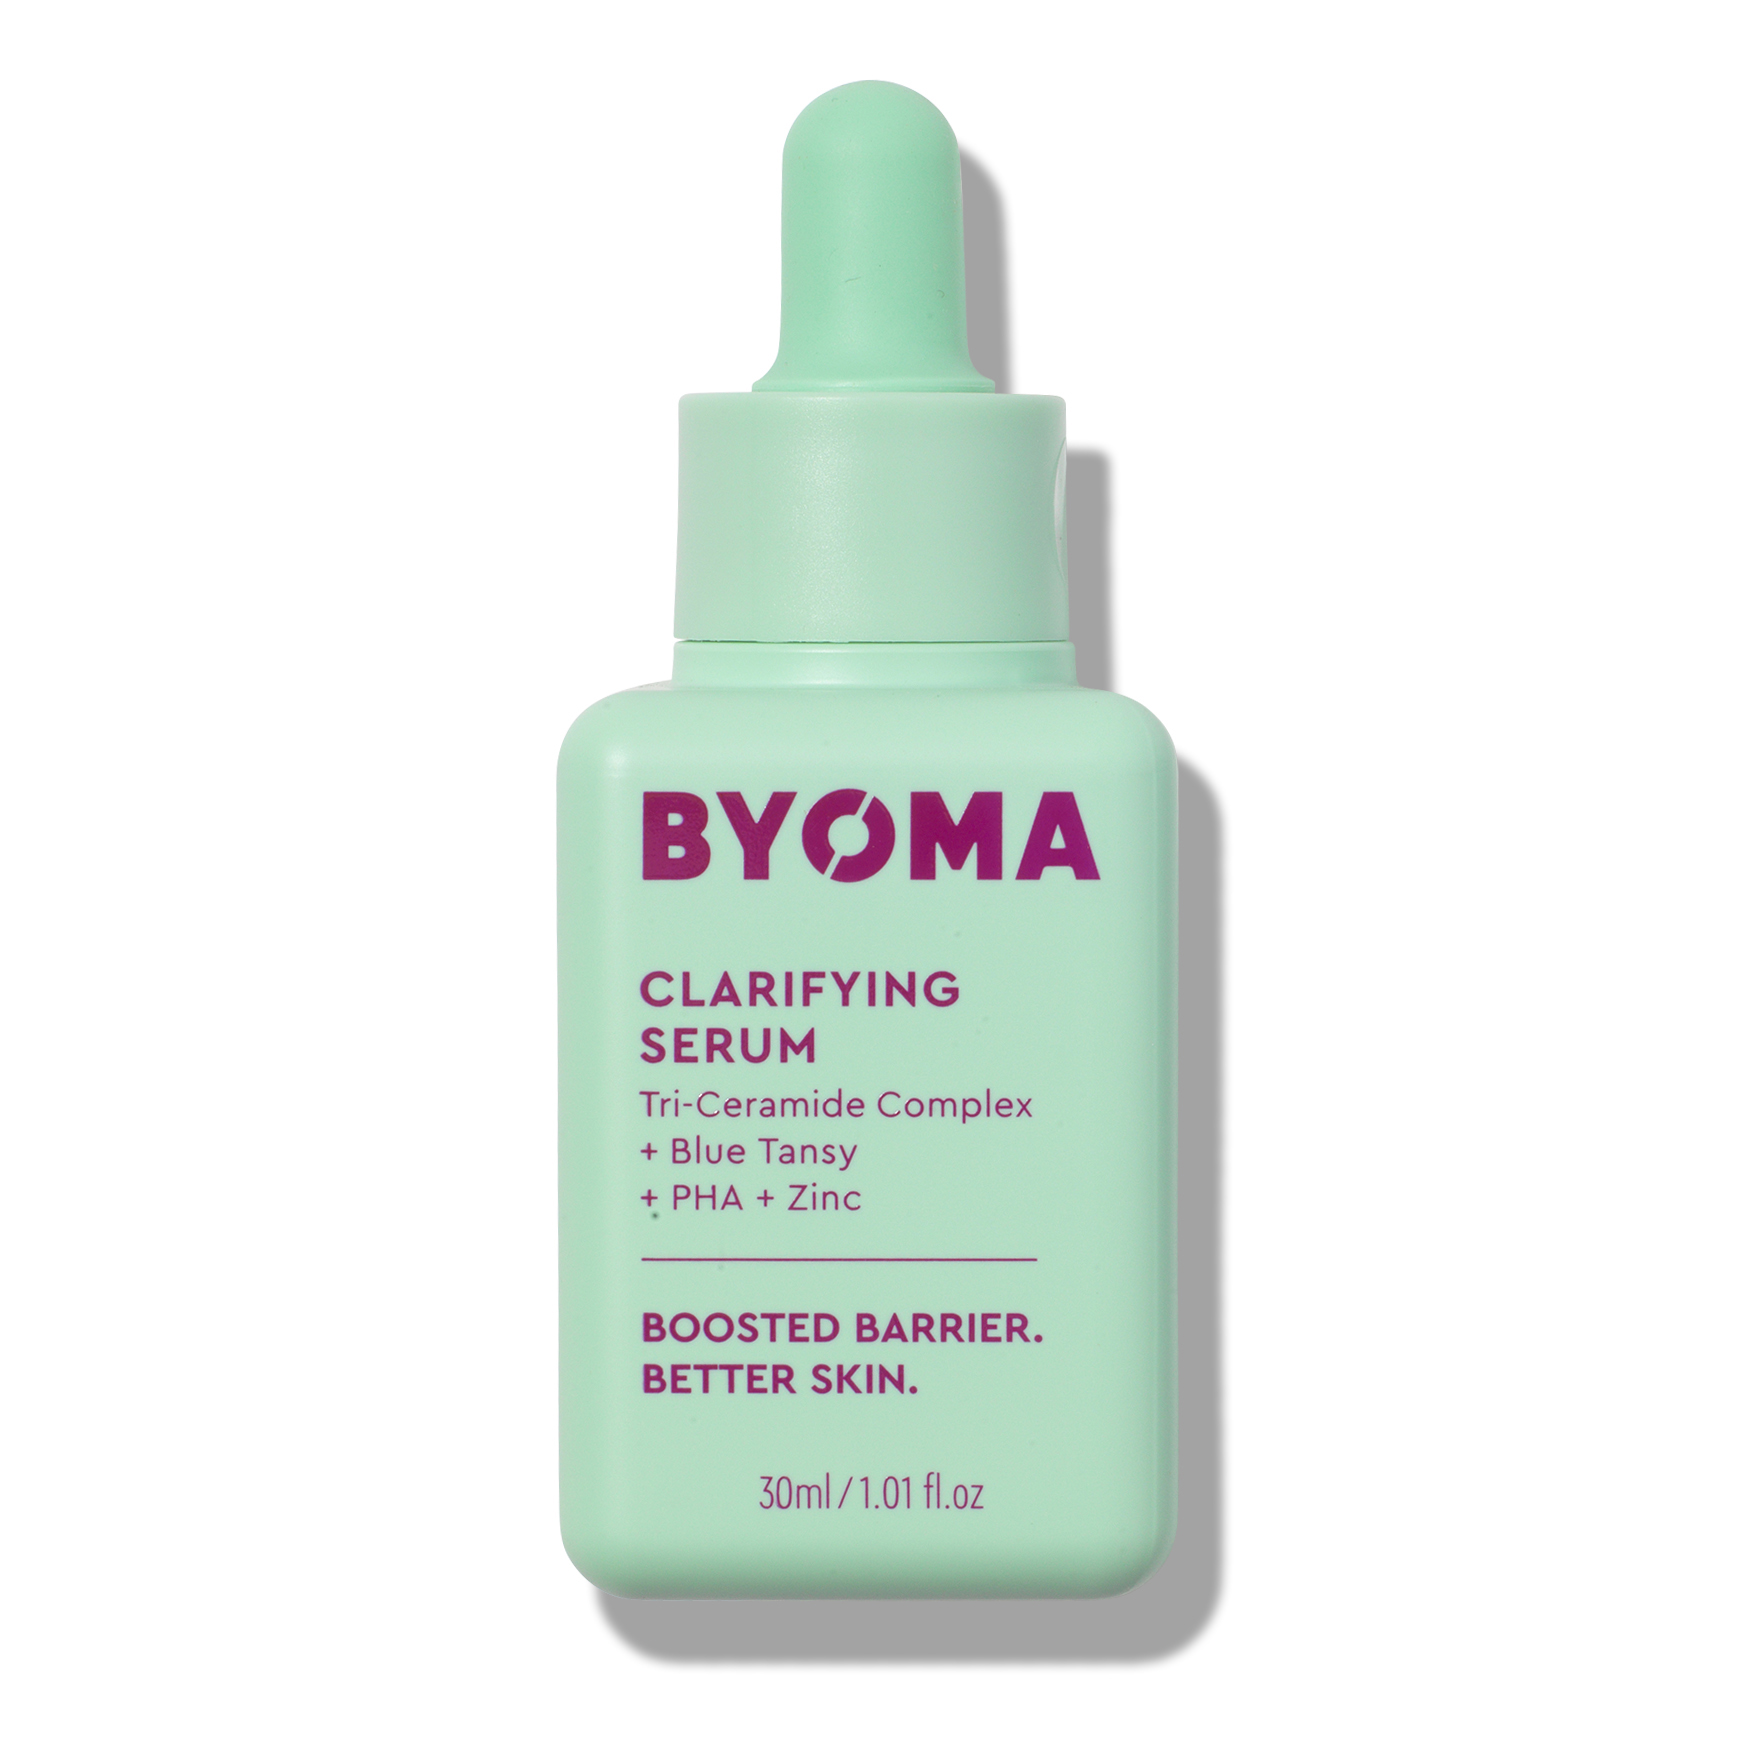 Byoma brand review - A Woman's Confidence